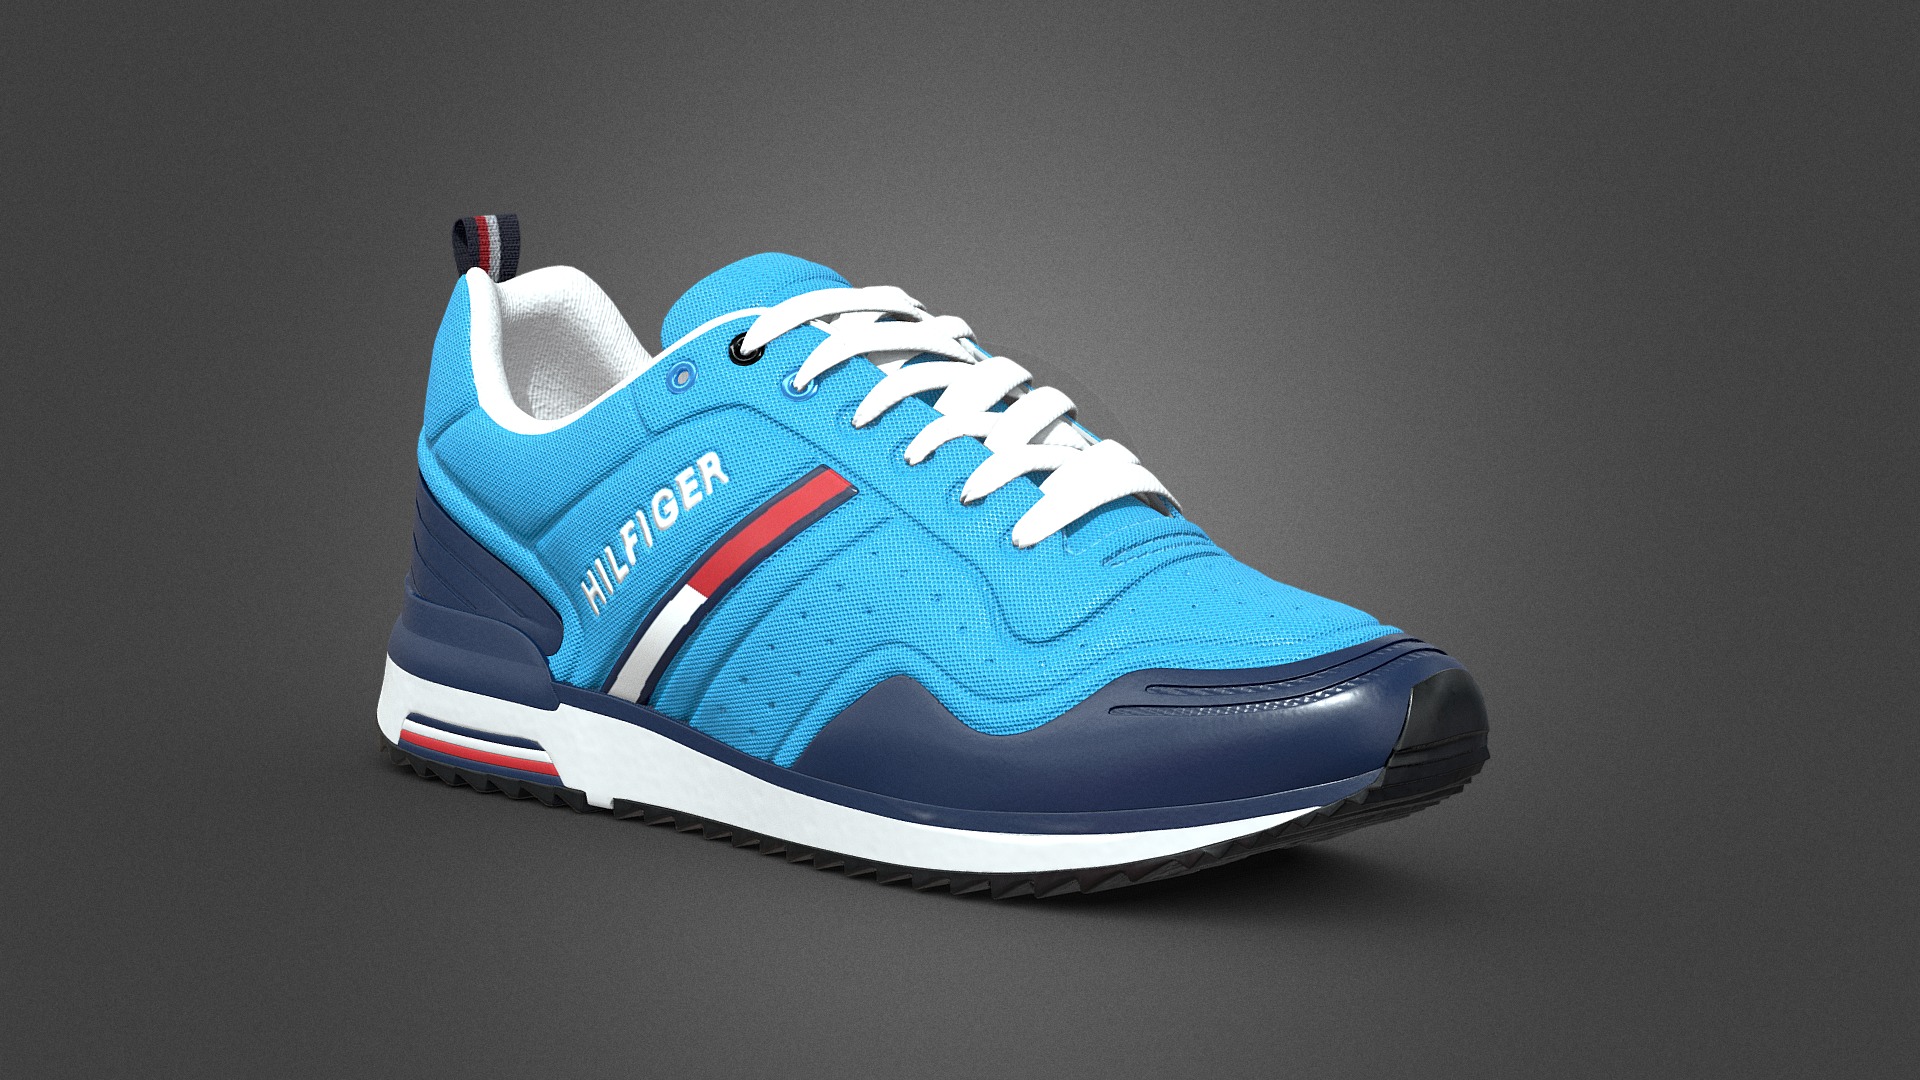 3D model Hilfiger - This is a 3D model of the Hilfiger. The 3D model is about a blue and white shoe.